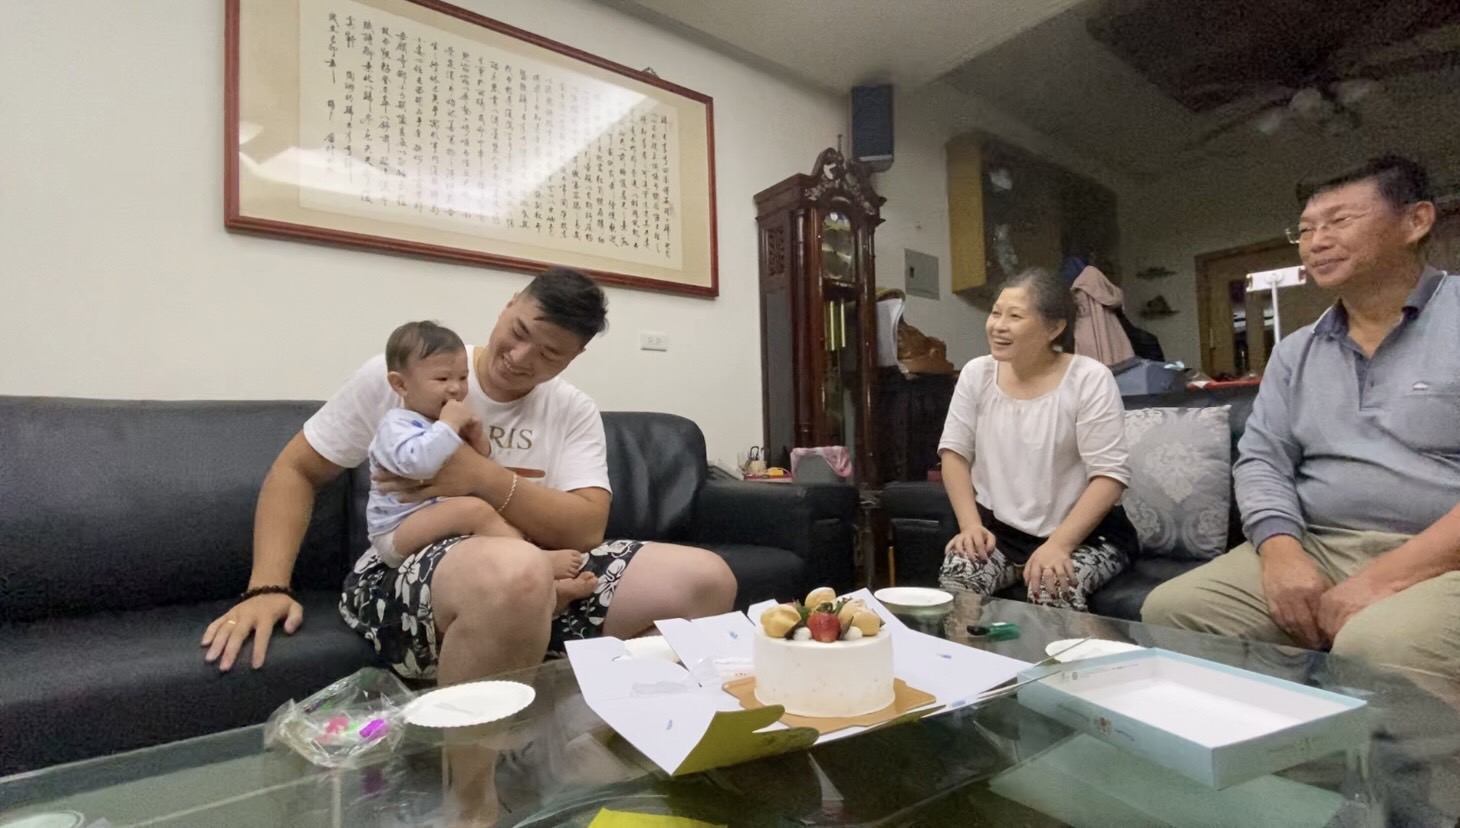 After marriage, Wang decided to move to Taiwan, and she has the blissful time being taken care of by her parents-in-law. (Photo / Provided & Authorized by @Somethingabouttaiwan)